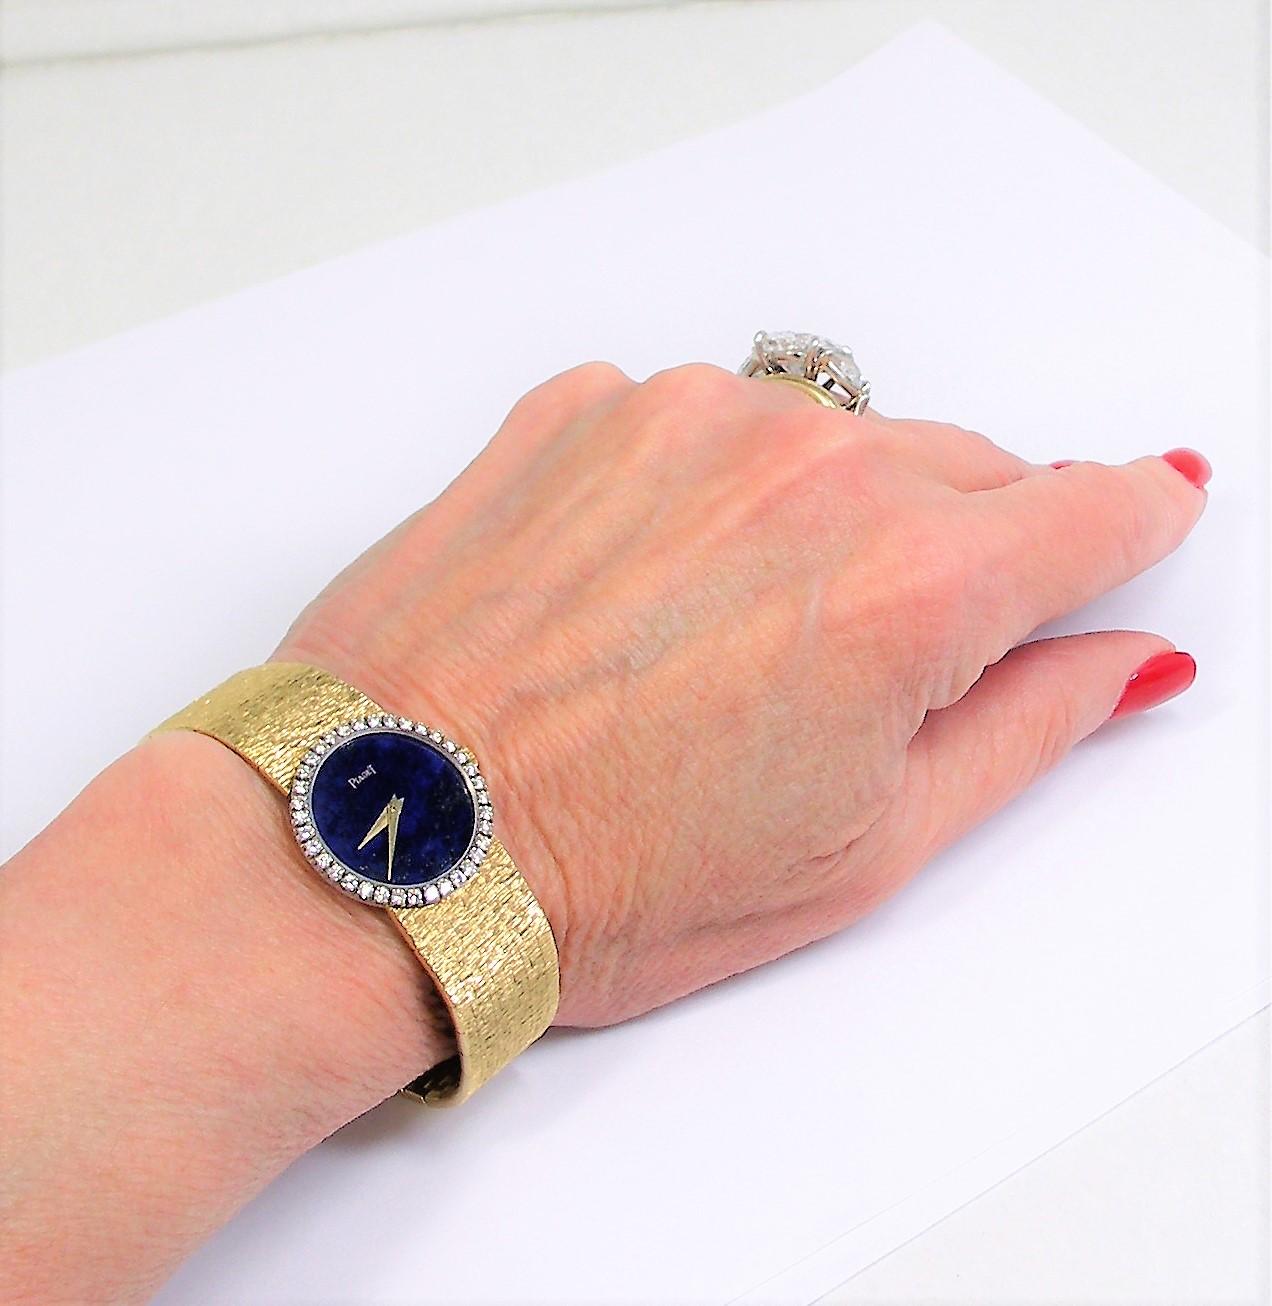 Ladies Piaget Watch with Lapis Dial and Diamond Bezel 3